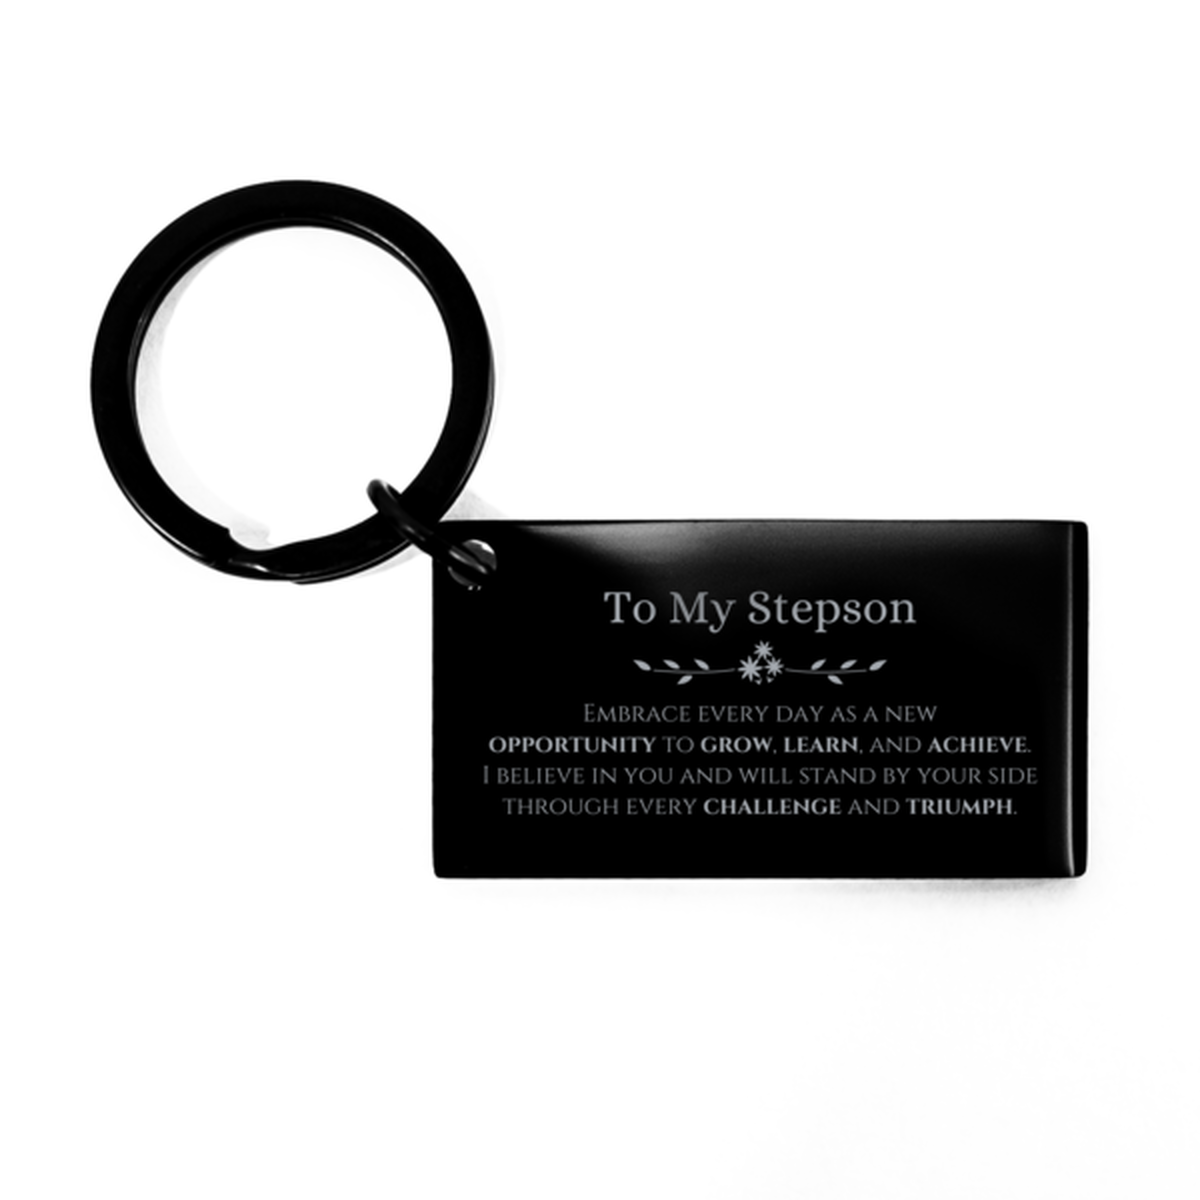 To My Stepson Gifts, I believe in you and will stand by your side, Inspirational Keychain For Stepson, Birthday Christmas Motivational Stepson Gifts